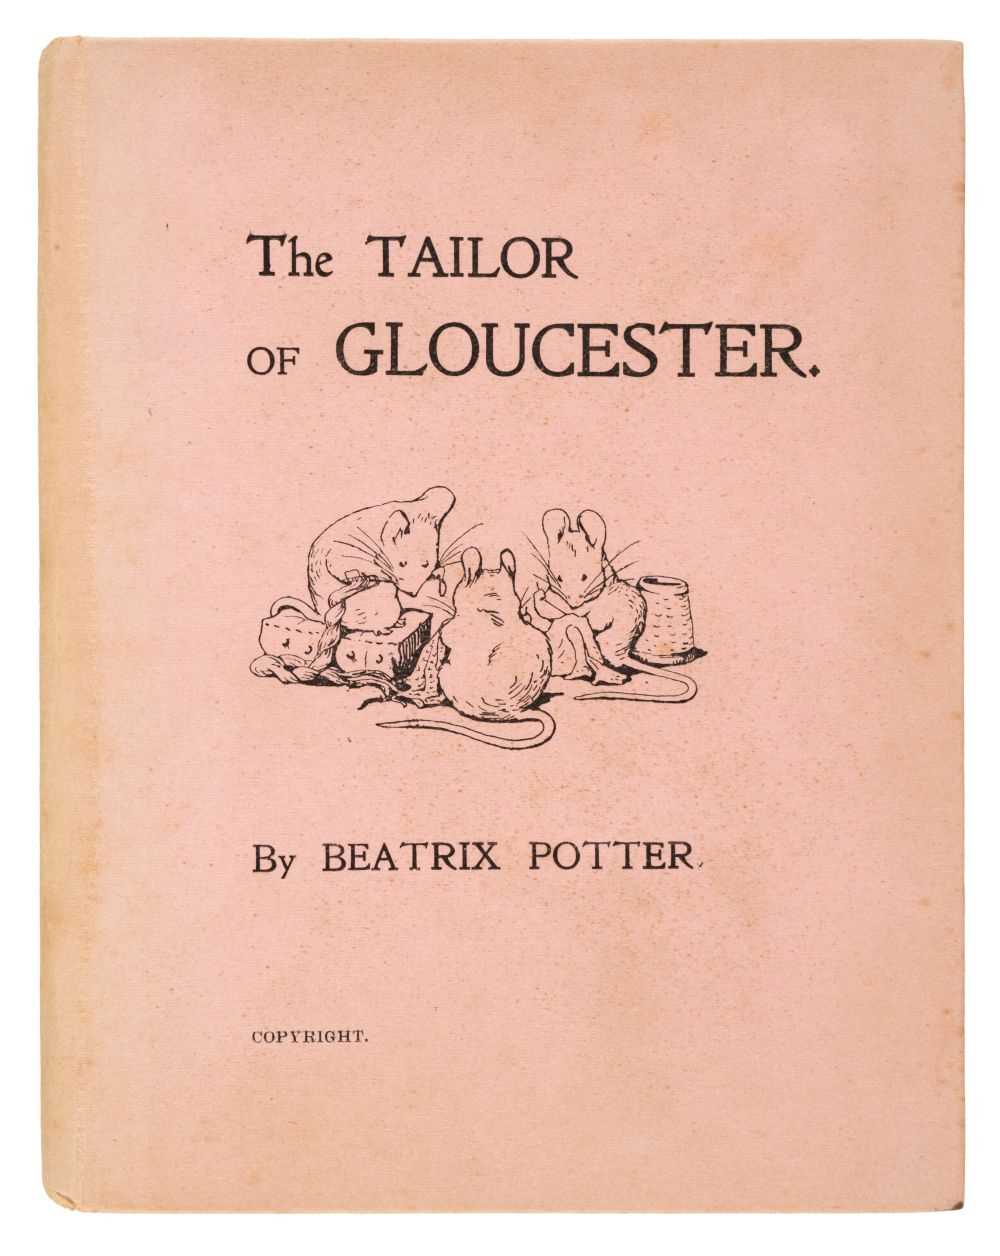 702 - Potter (Beatrix). The Tailor of Gloucester, 1st privately printed edition, [Strangeways], 1902